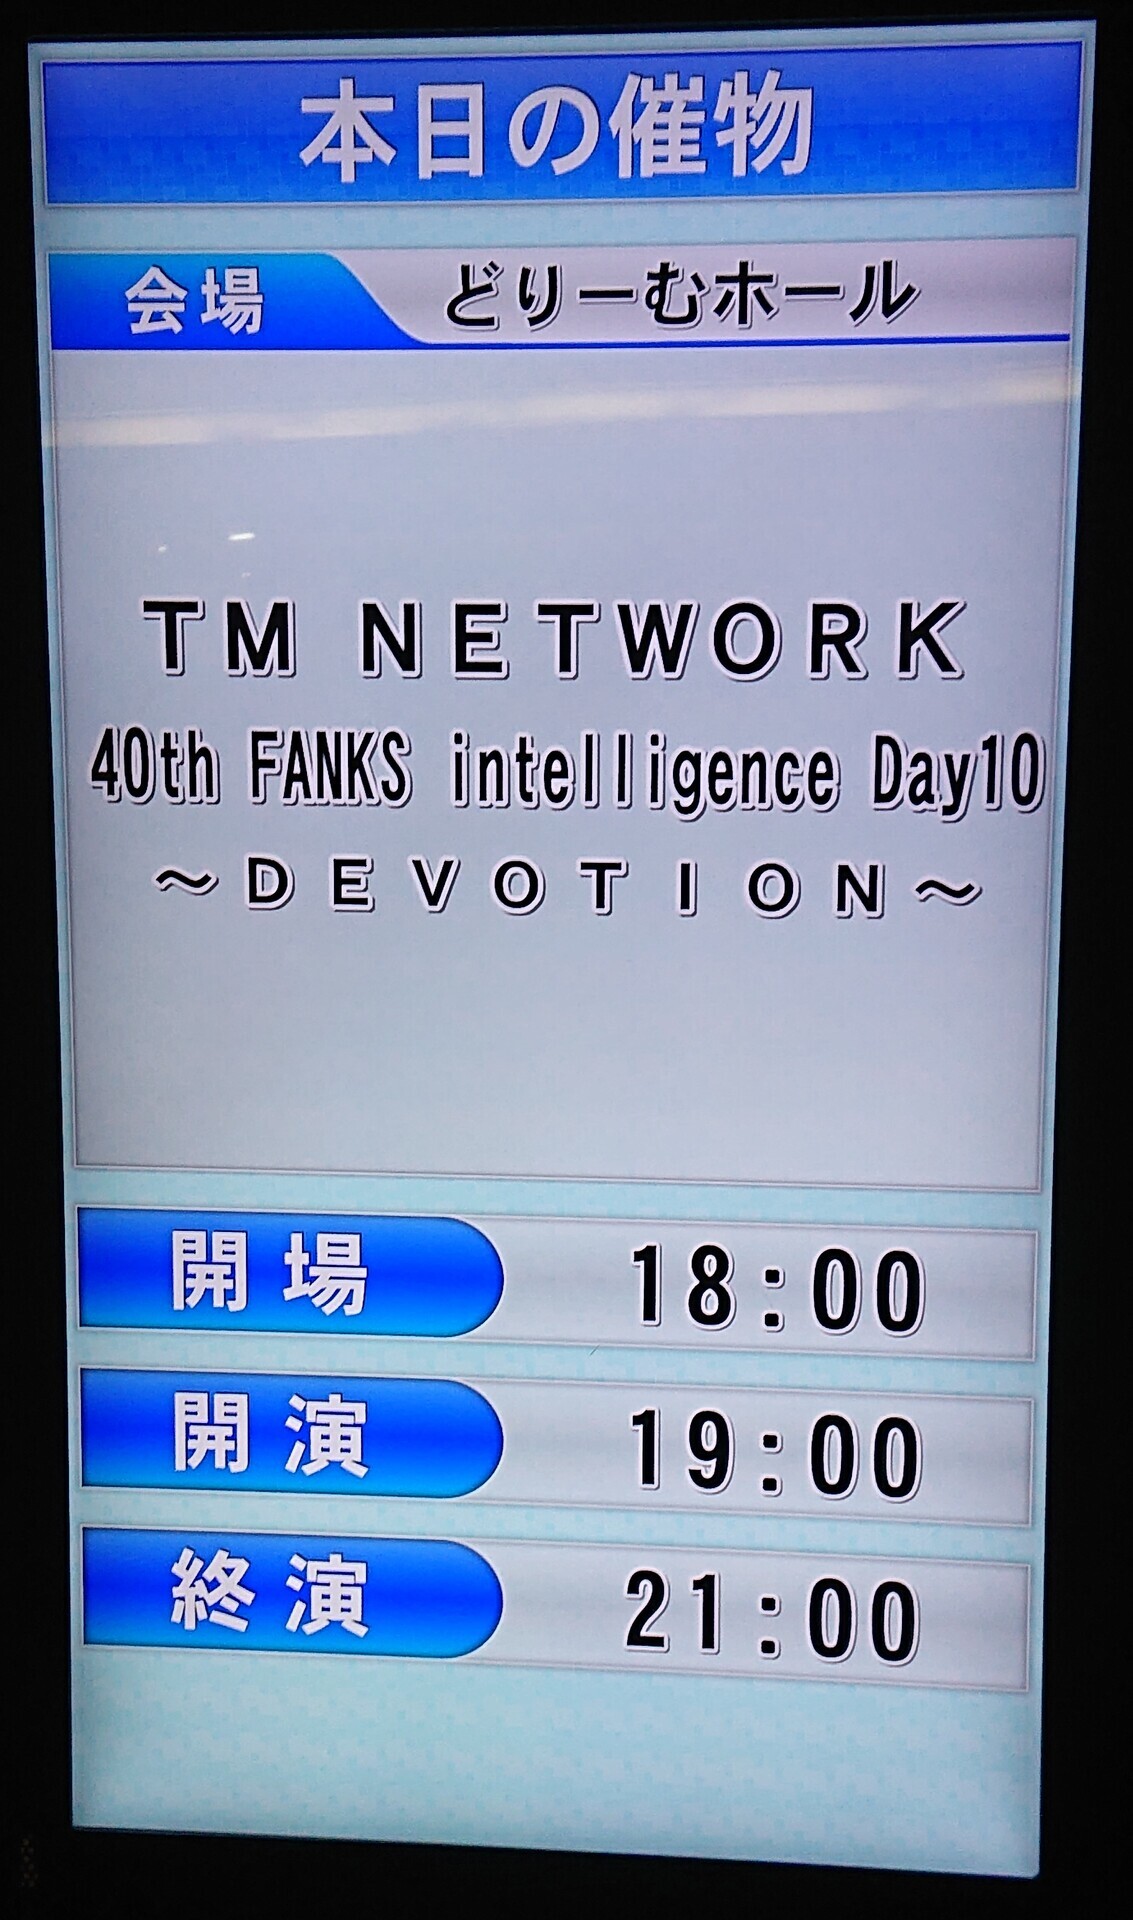 Devotion Tourの始まりとSTAND 3 Finalの発表: 20 Years After -TMN通史-